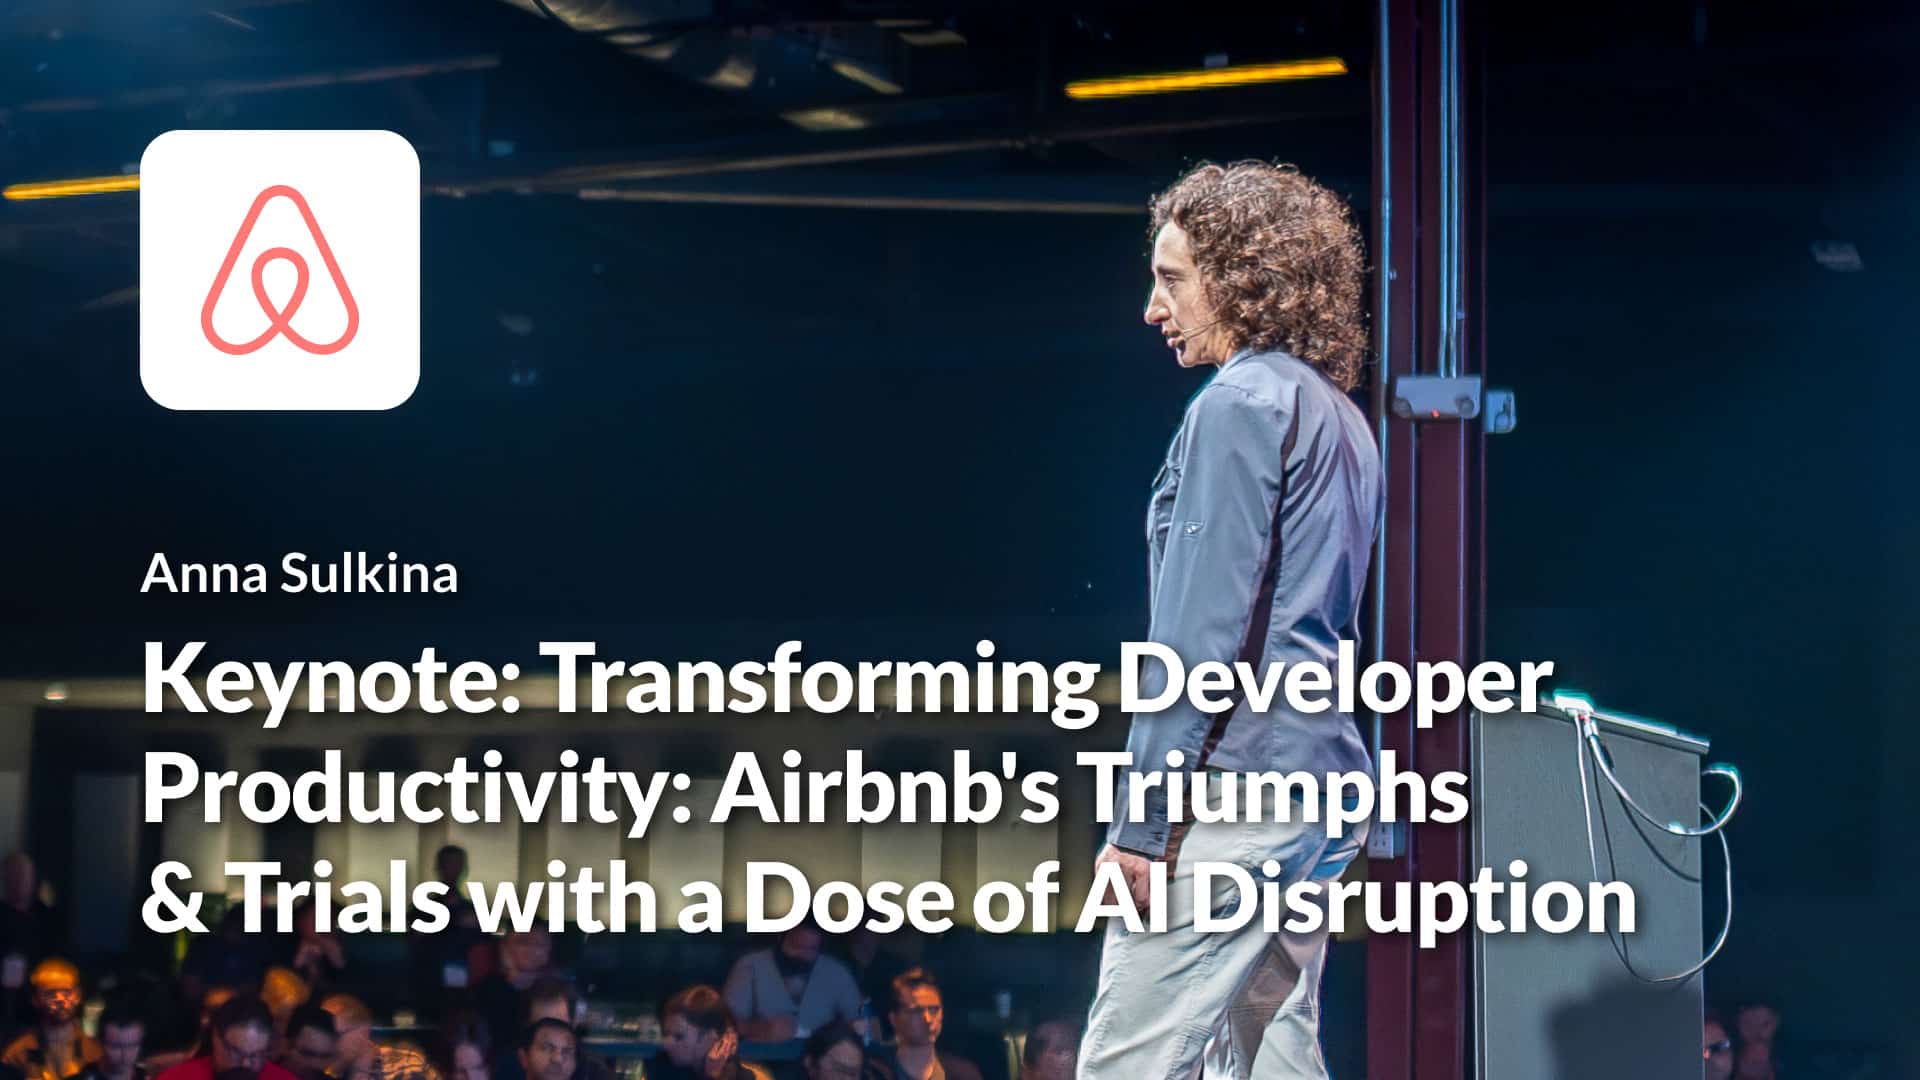 Transforming Developer Productivity: Airbnb’s Triumphs and Trials with a Dose of AI Disruption